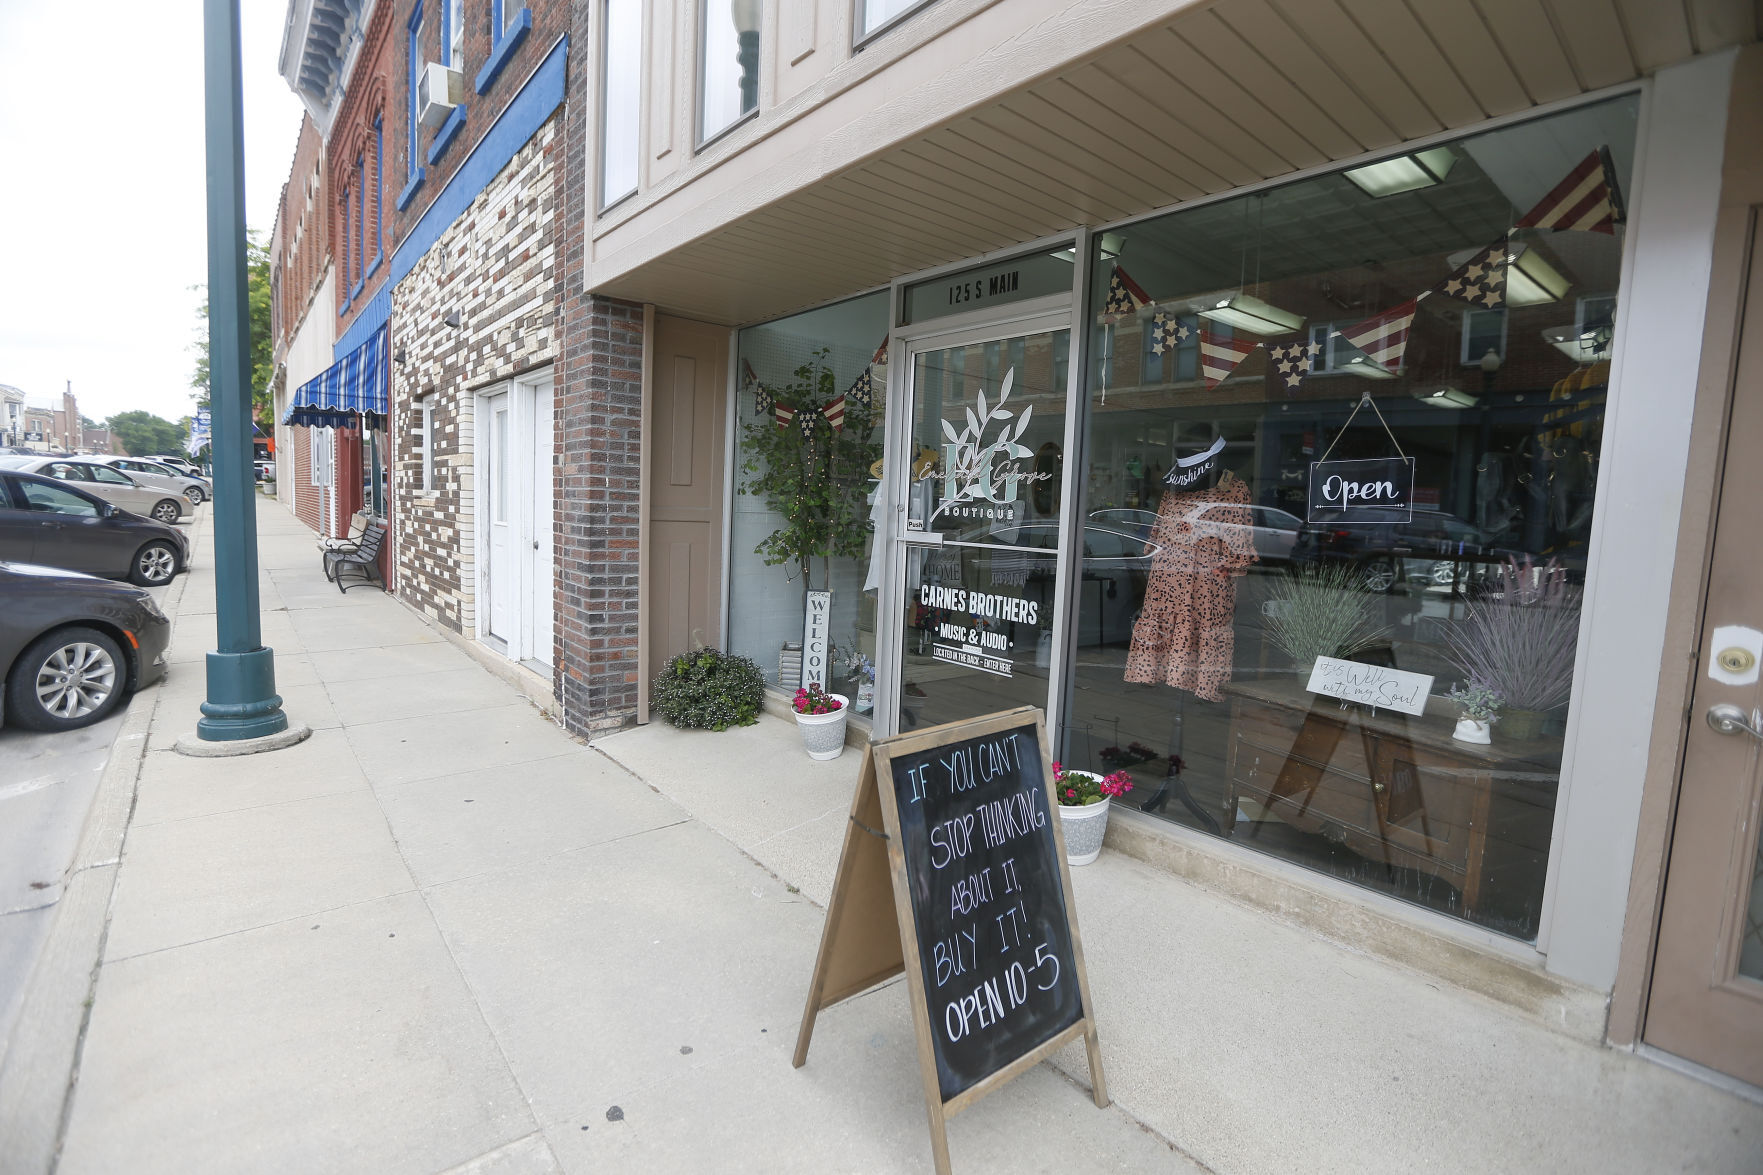 Emerald Grove Boutique located in Elkader, Iowa, on Friday, June 25, 2021.    PHOTO CREDIT: Dave Kettering